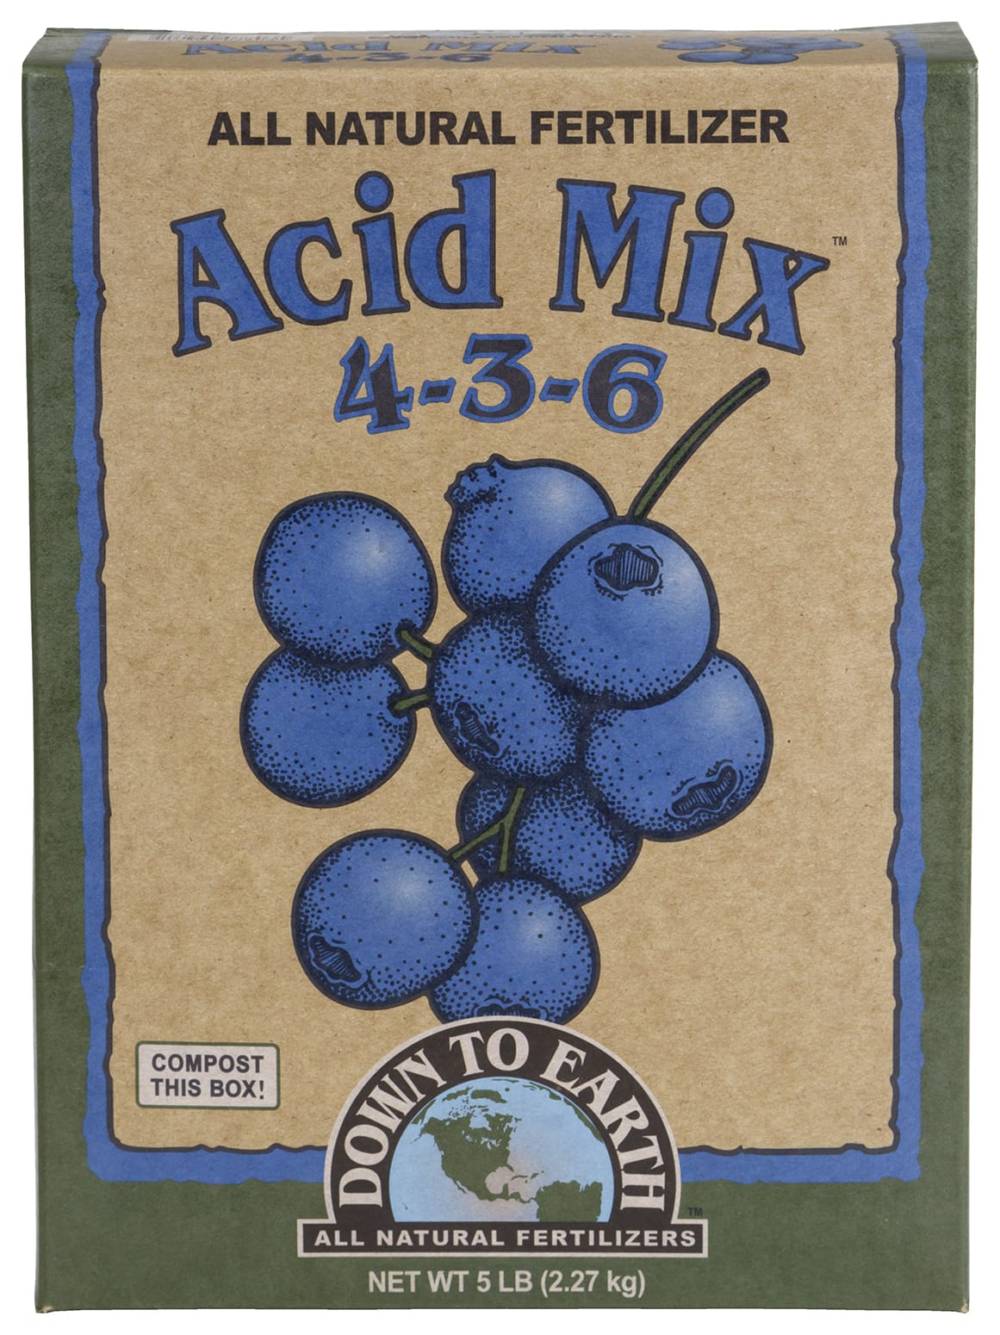 Box of Down To Earth Acid Mix